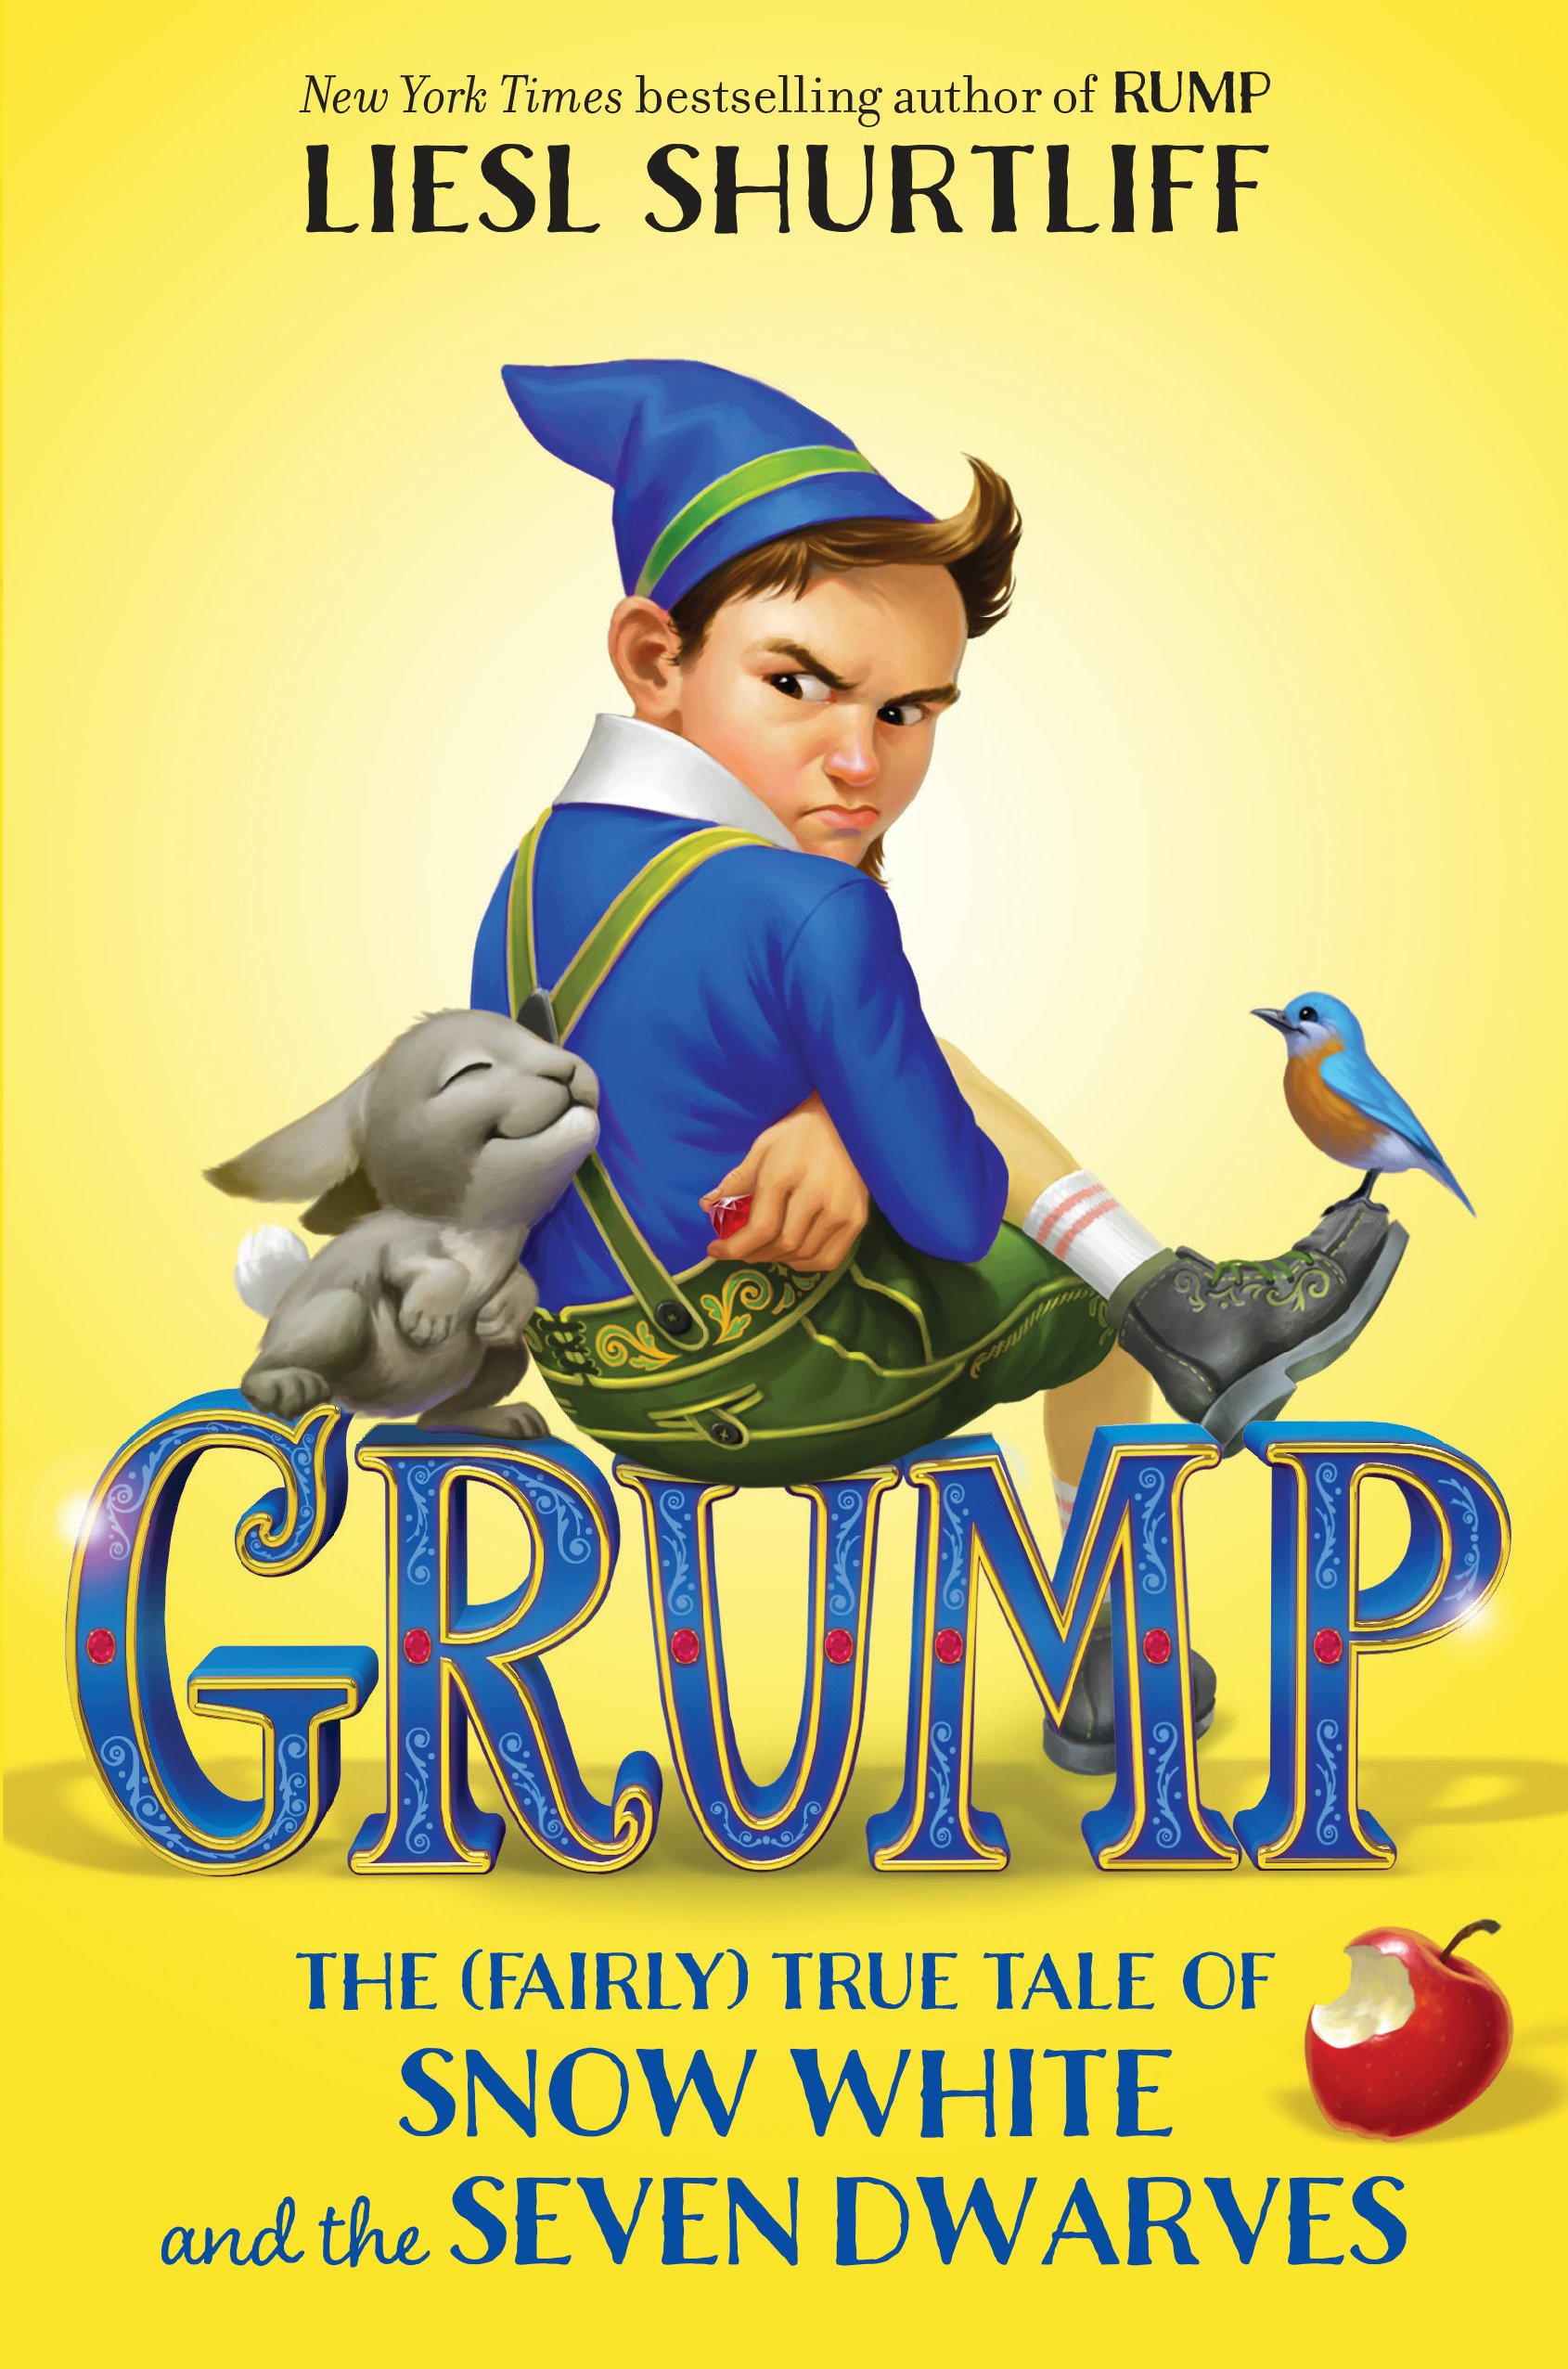 A boy is sitting on the title and wearing a blue pointy hat and green suspenders while angrily looking at a bunny who is cuddling him. A blue bird sits on his foot and a bitten apple is close to the subtitle which shows the book deals with Snow White and the Seven Dwarves.